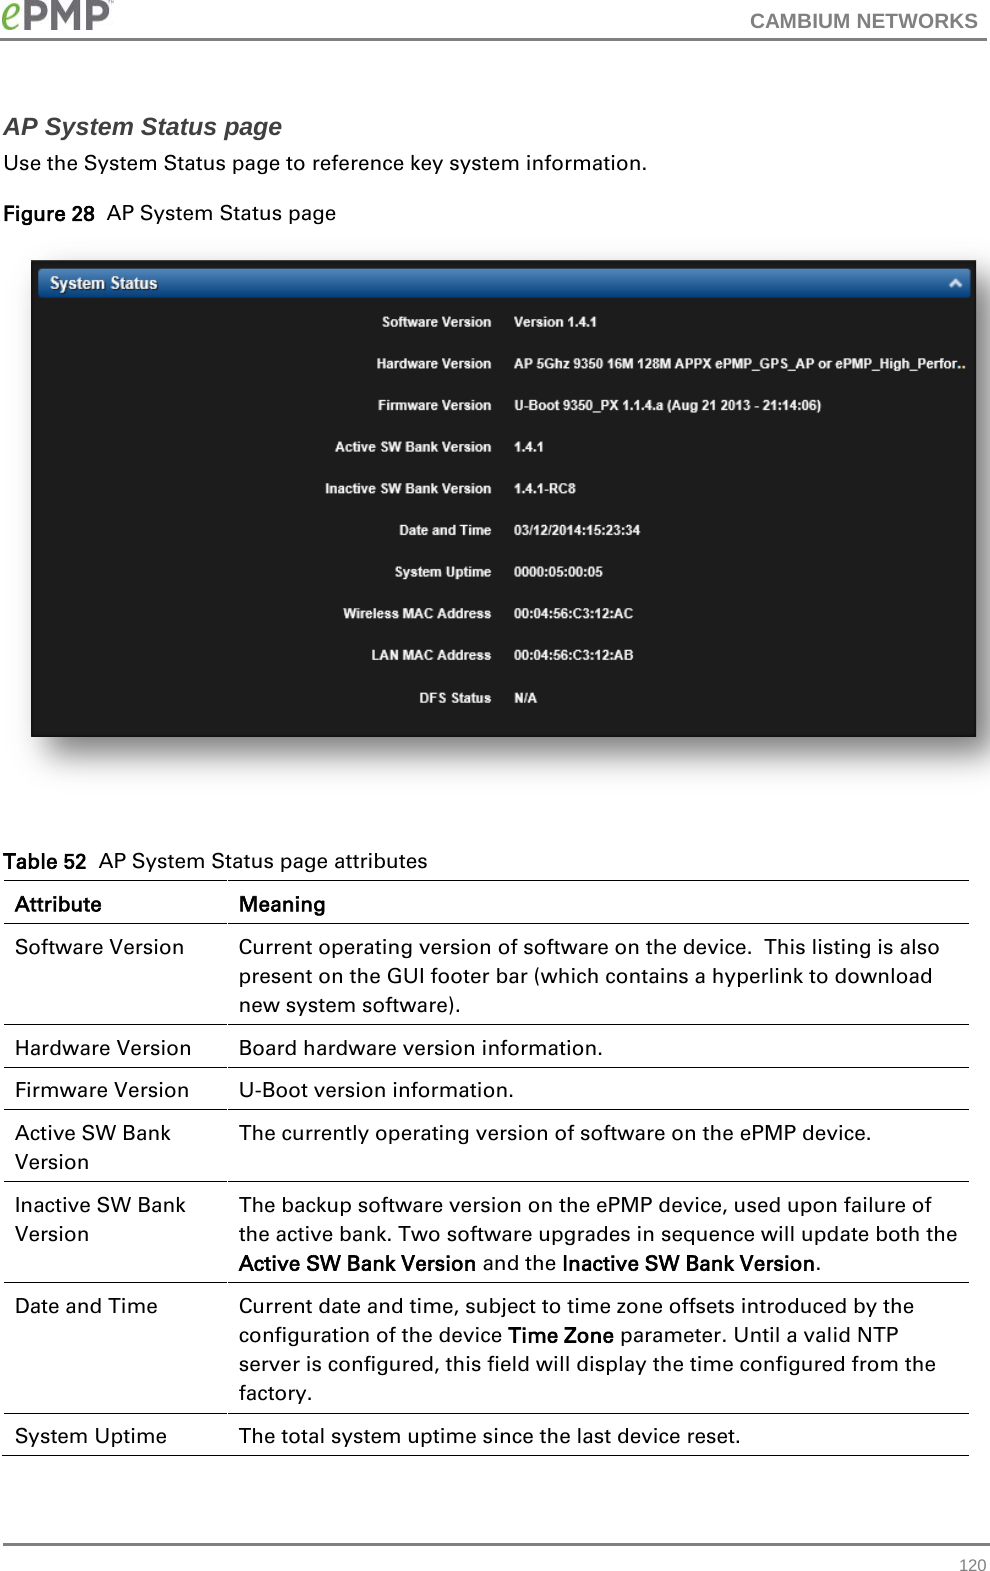 CAMBIUM NETWORKS  AP System Status page Use the System Status page to reference key system information. Figure 28  AP System Status page   Table 52  AP System Status page attributes Attribute Meaning Software Version Current operating version of software on the device.  This listing is also present on the GUI footer bar (which contains a hyperlink to download new system software). Hardware Version Board hardware version information. Firmware Version  U-Boot version information. Active SW Bank Version The currently operating version of software on the ePMP device. Inactive SW Bank Version The backup software version on the ePMP device, used upon failure of the active bank. Two software upgrades in sequence will update both the Active SW Bank Version and the Inactive SW Bank Version. Date and Time Current date and time, subject to time zone offsets introduced by the configuration of the device Time Zone parameter. Until a valid NTP server is configured, this field will display the time configured from the factory. System Uptime The total system uptime since the last device reset.  120 